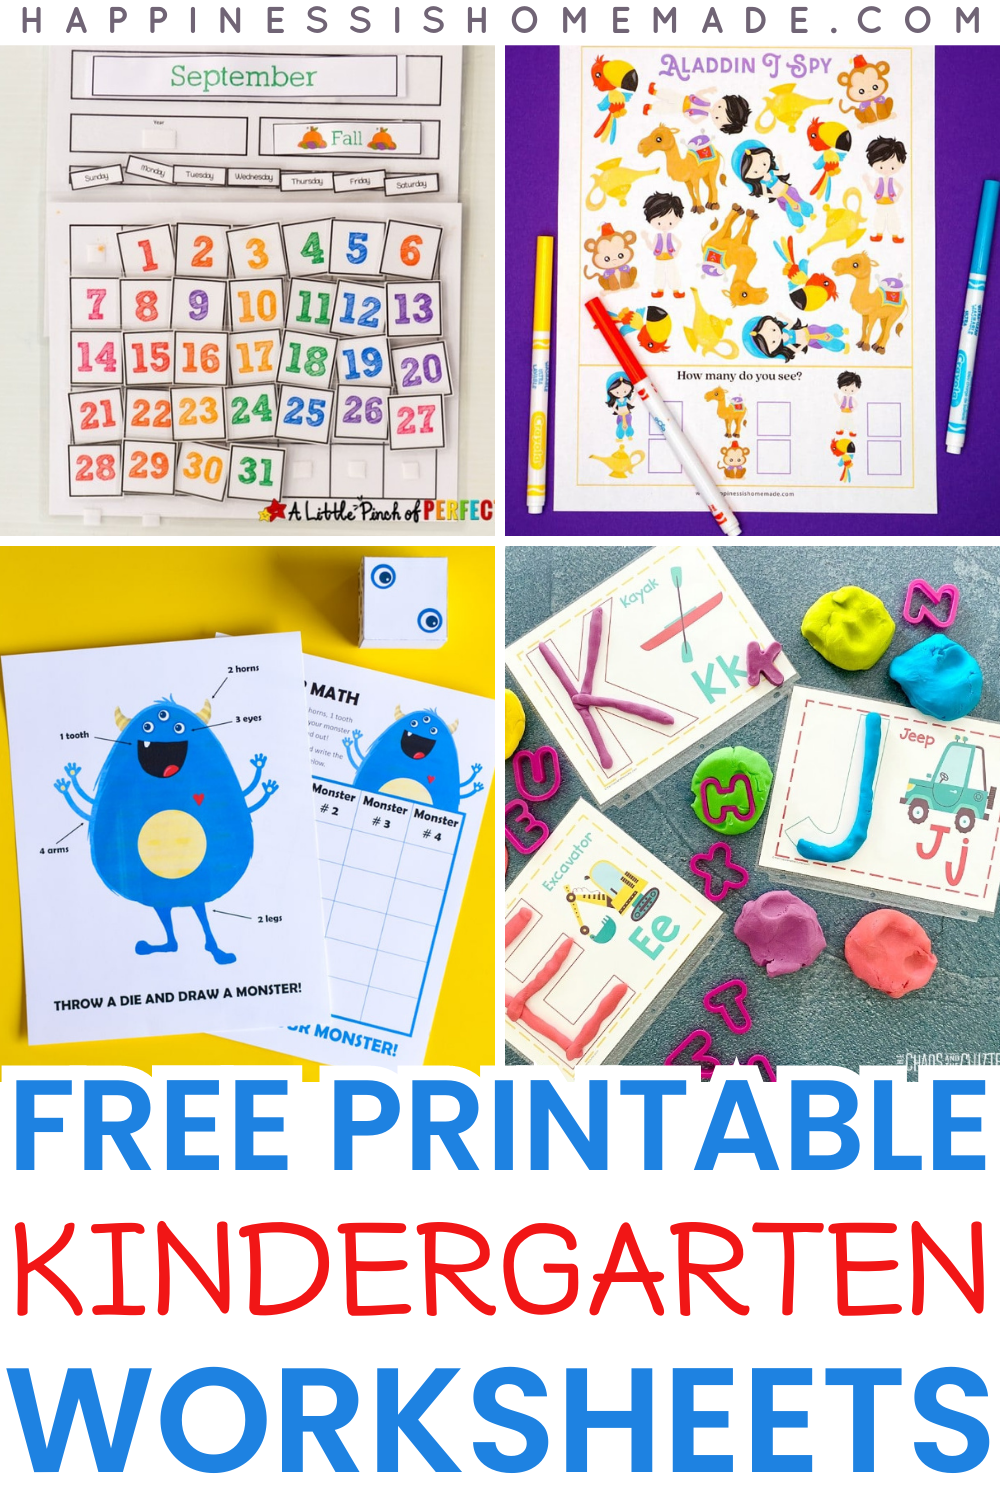 Free Printable Kindergarten Worksheets graphic with collage